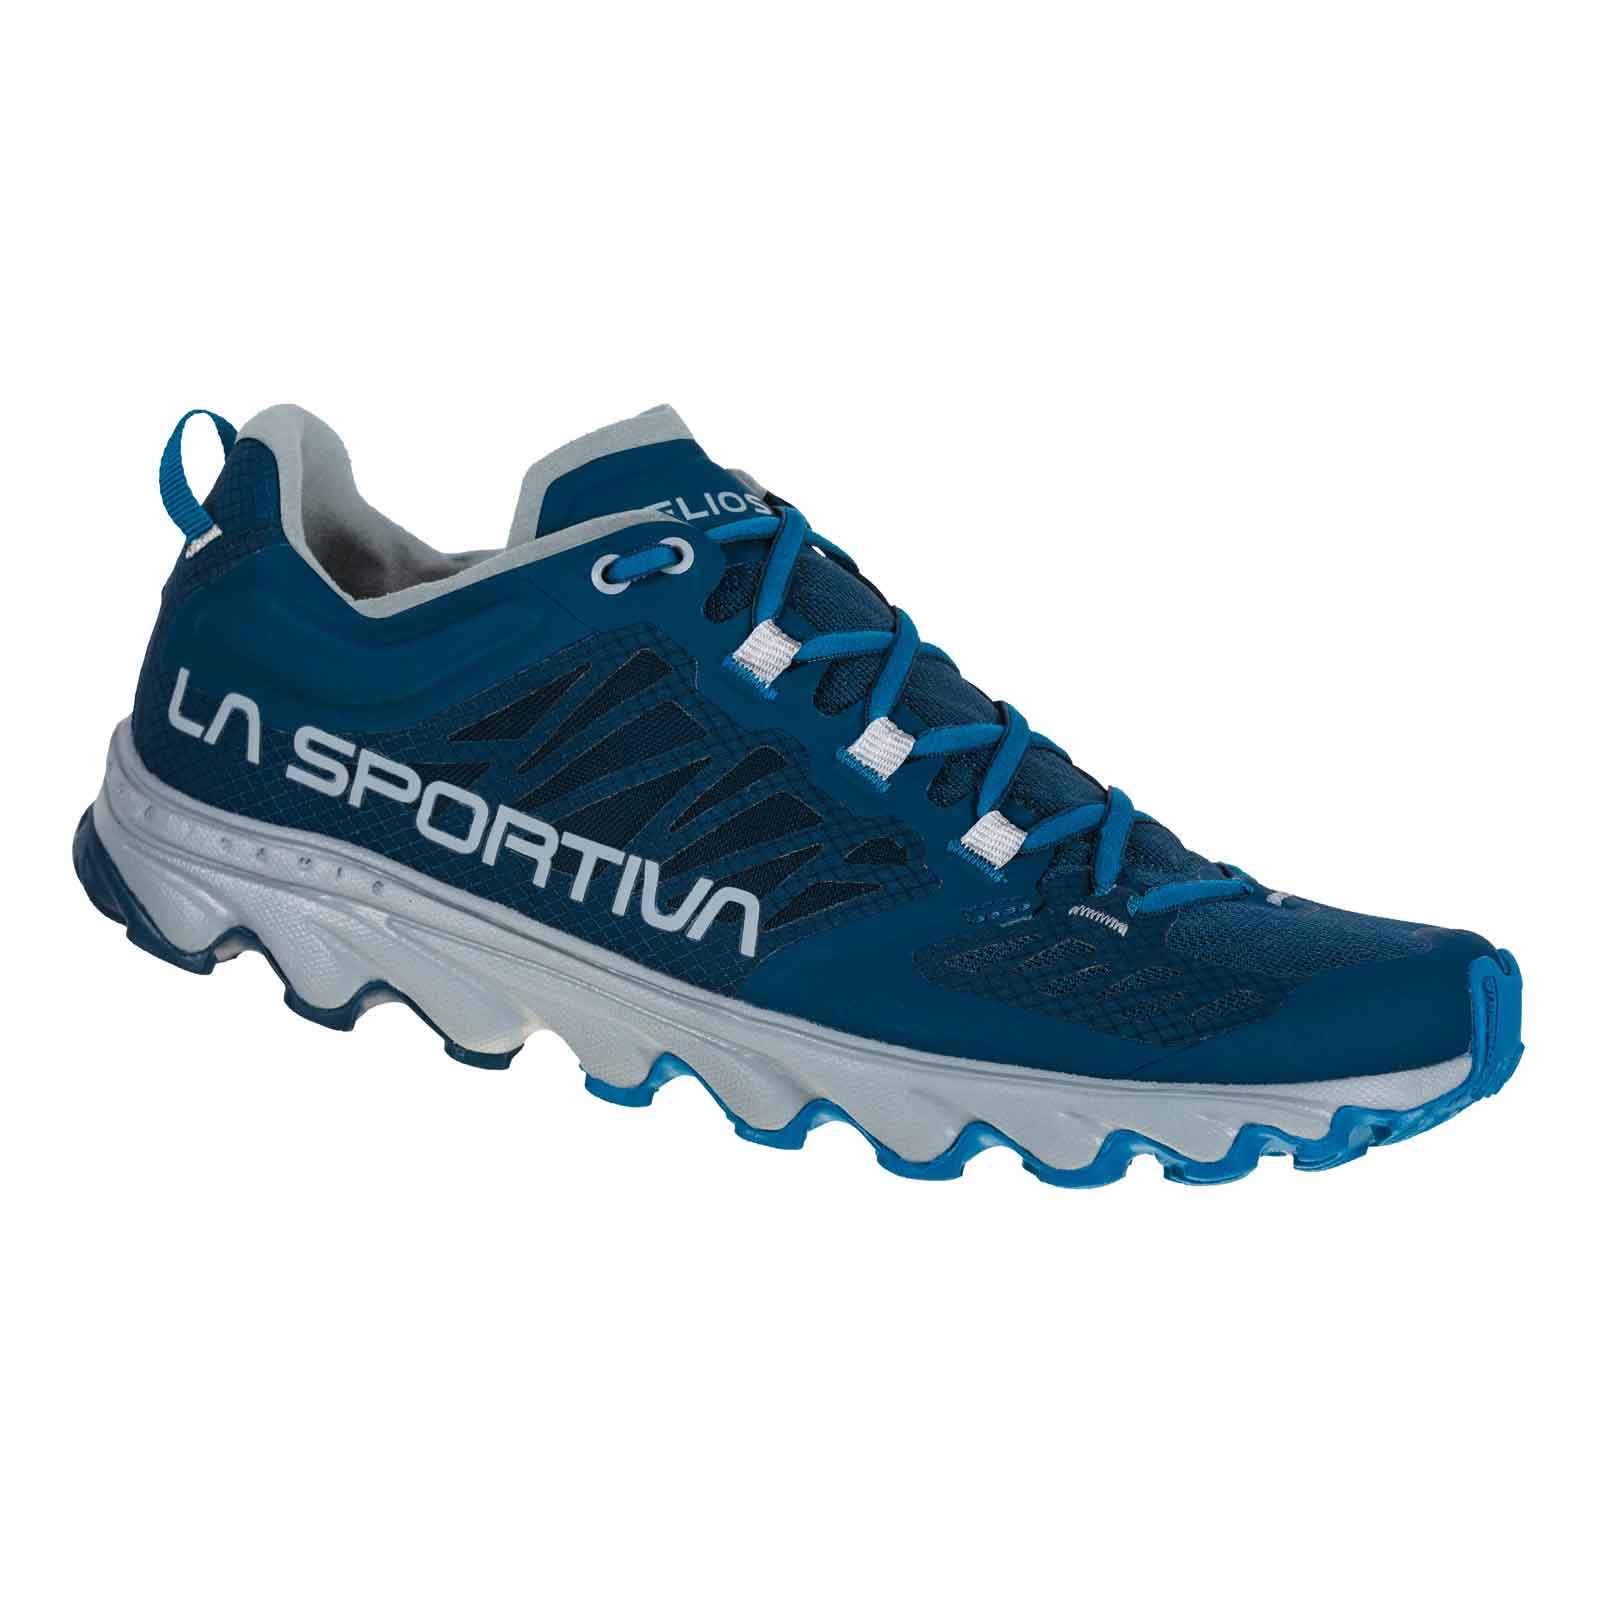 ultra light trail shoes